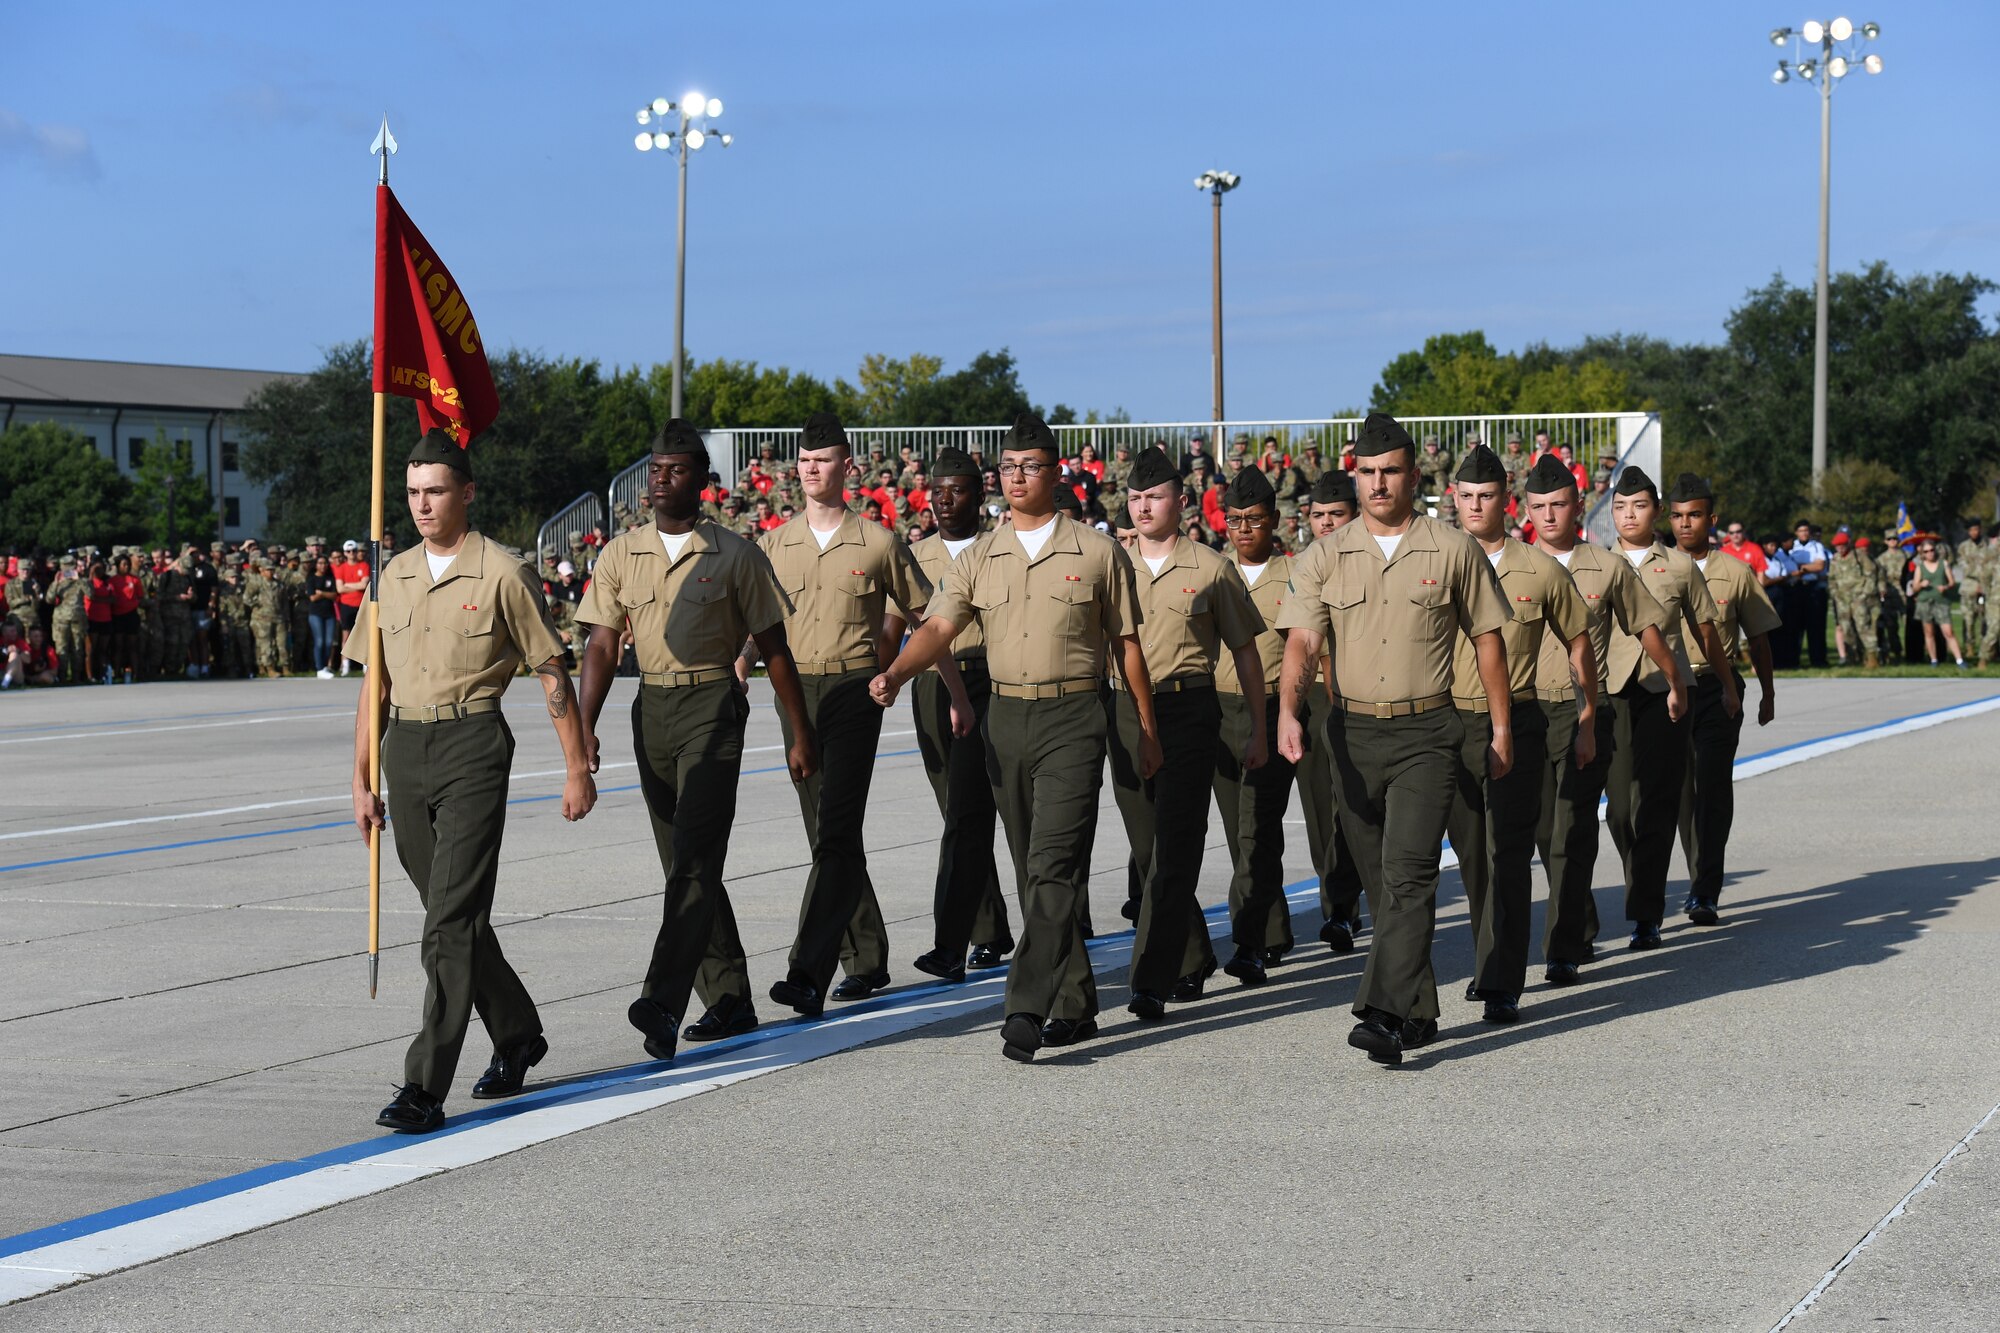 Members of the Keesler Marine Detachment regulation drill team perform during the 81st Training Group drill down on the Levitow Training Support Facility drill pad at Keesler Air Force Base, Mississippi, Sept. 16, 2022. Keesler trains more than 30,000 students each year. While in training, Airmen are given the opportunity to volunteer to learn and execute drill down routines. (U.S. Air Force photo by Kemberly Groue)